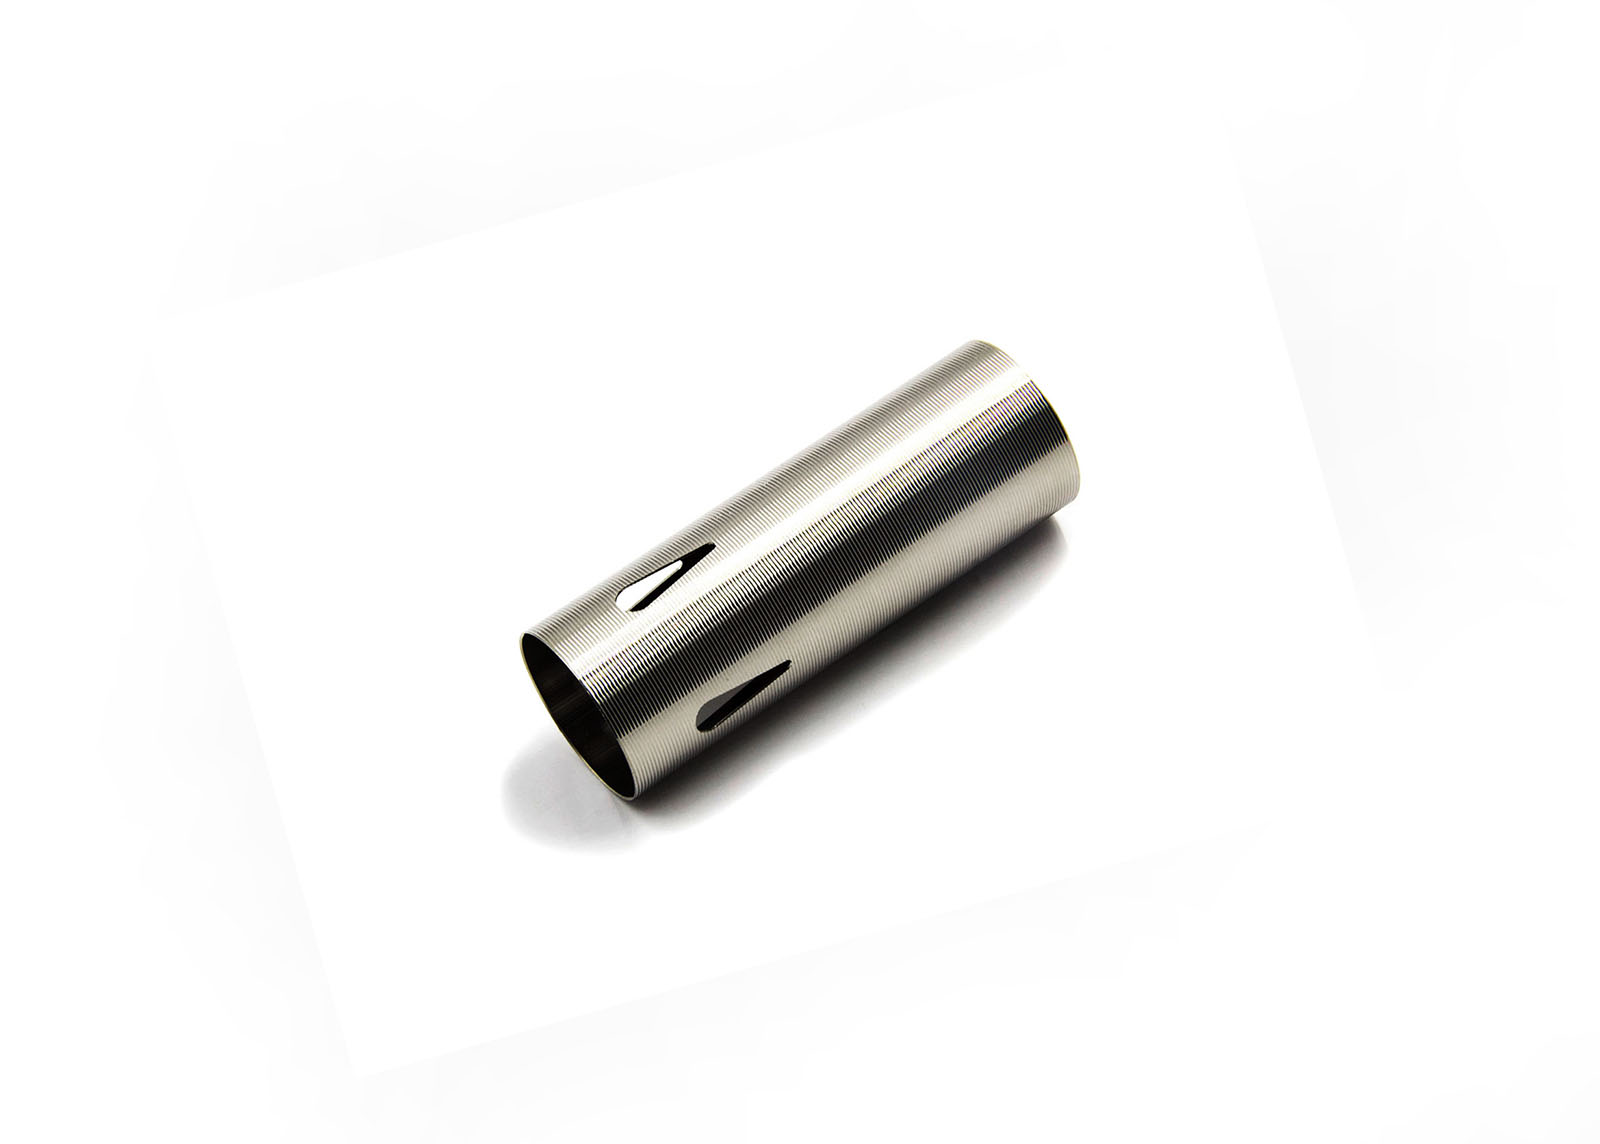 Bore-Up Cylinder Type 2 for M4A1, MC51, SIG551, XM177 - Modify Airsoft parts